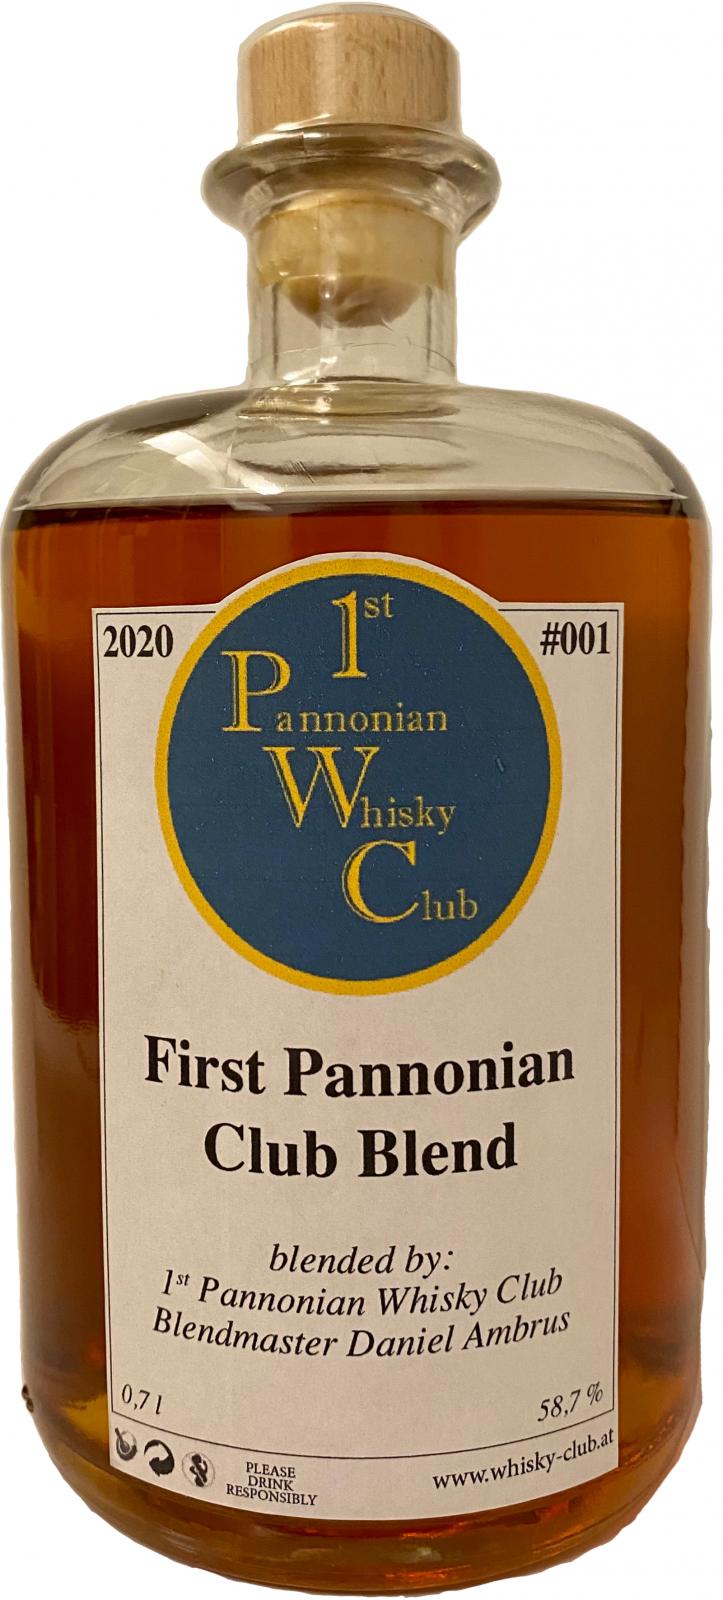 1st Pannonian Whisky Club First Pannonian Club Blend